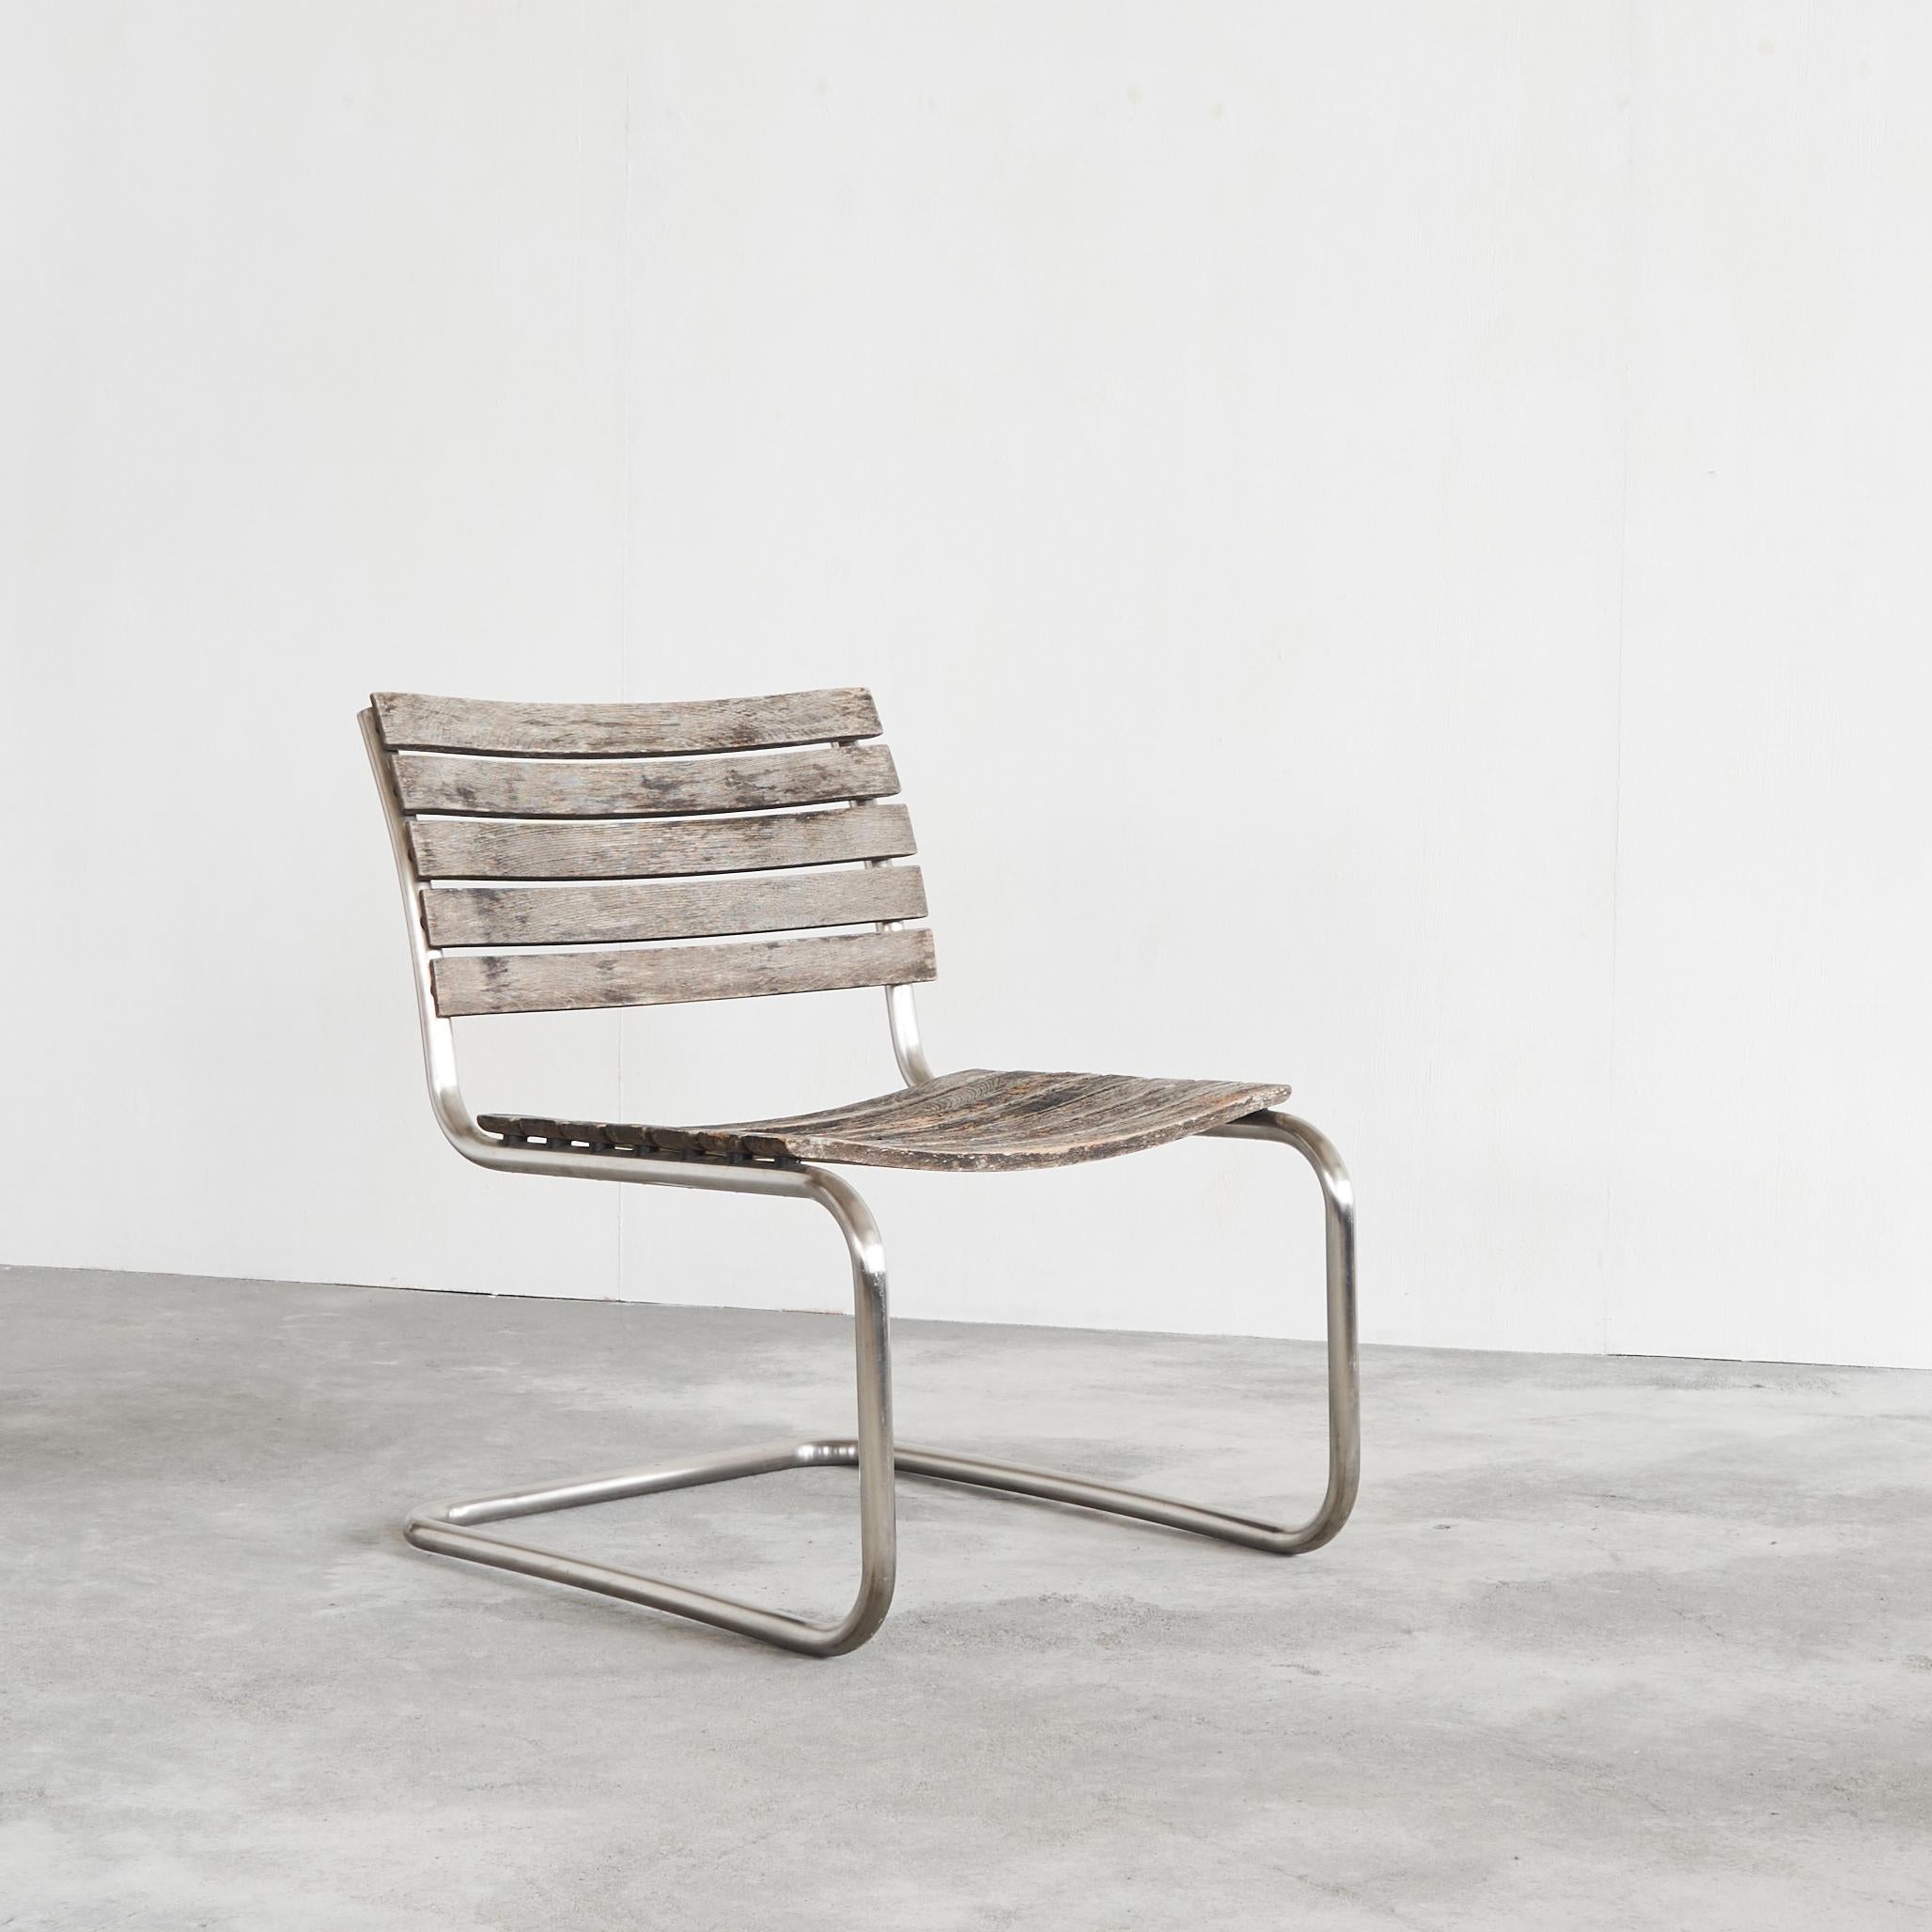 Mart Stam Lounge Chair for Thonet in Weathered Solid Iroko and Stainless Steel, Germany, early 21st century.

Beautiful and rare lounge version of the S40 chair by Mart Stam, which is no longer in production. Early 21st century edition by Thonet in